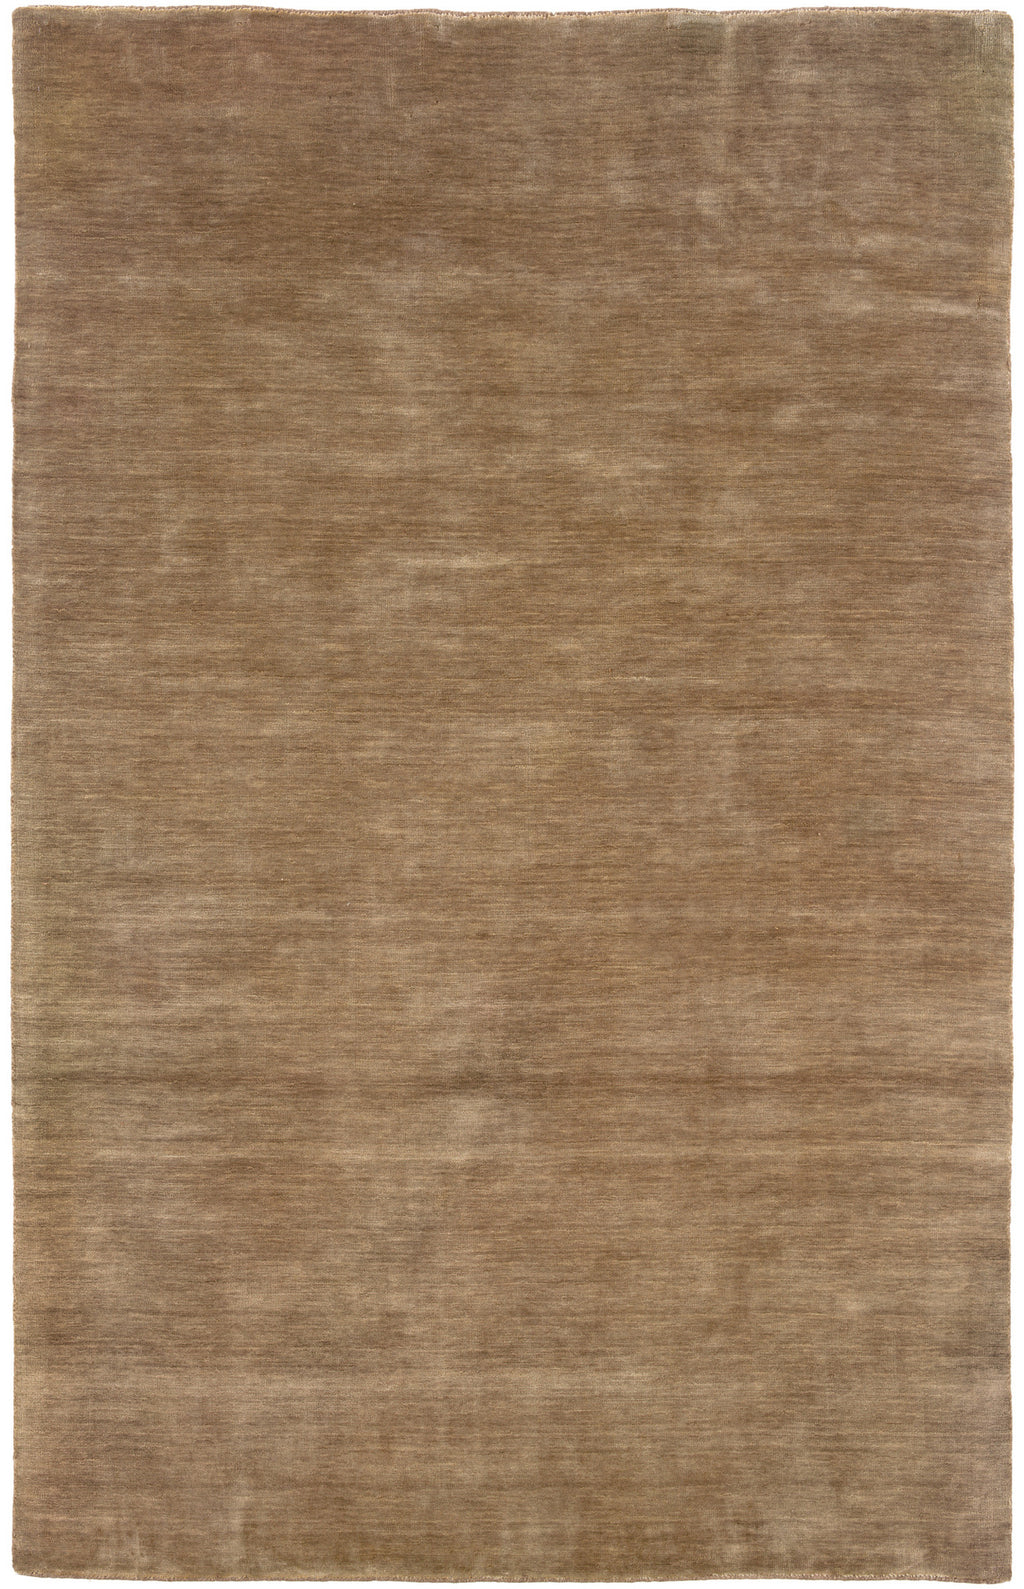 LR Resources Loom Seridian 03812 Taupe Hand Loomed Area Rug 5' X 7'9''